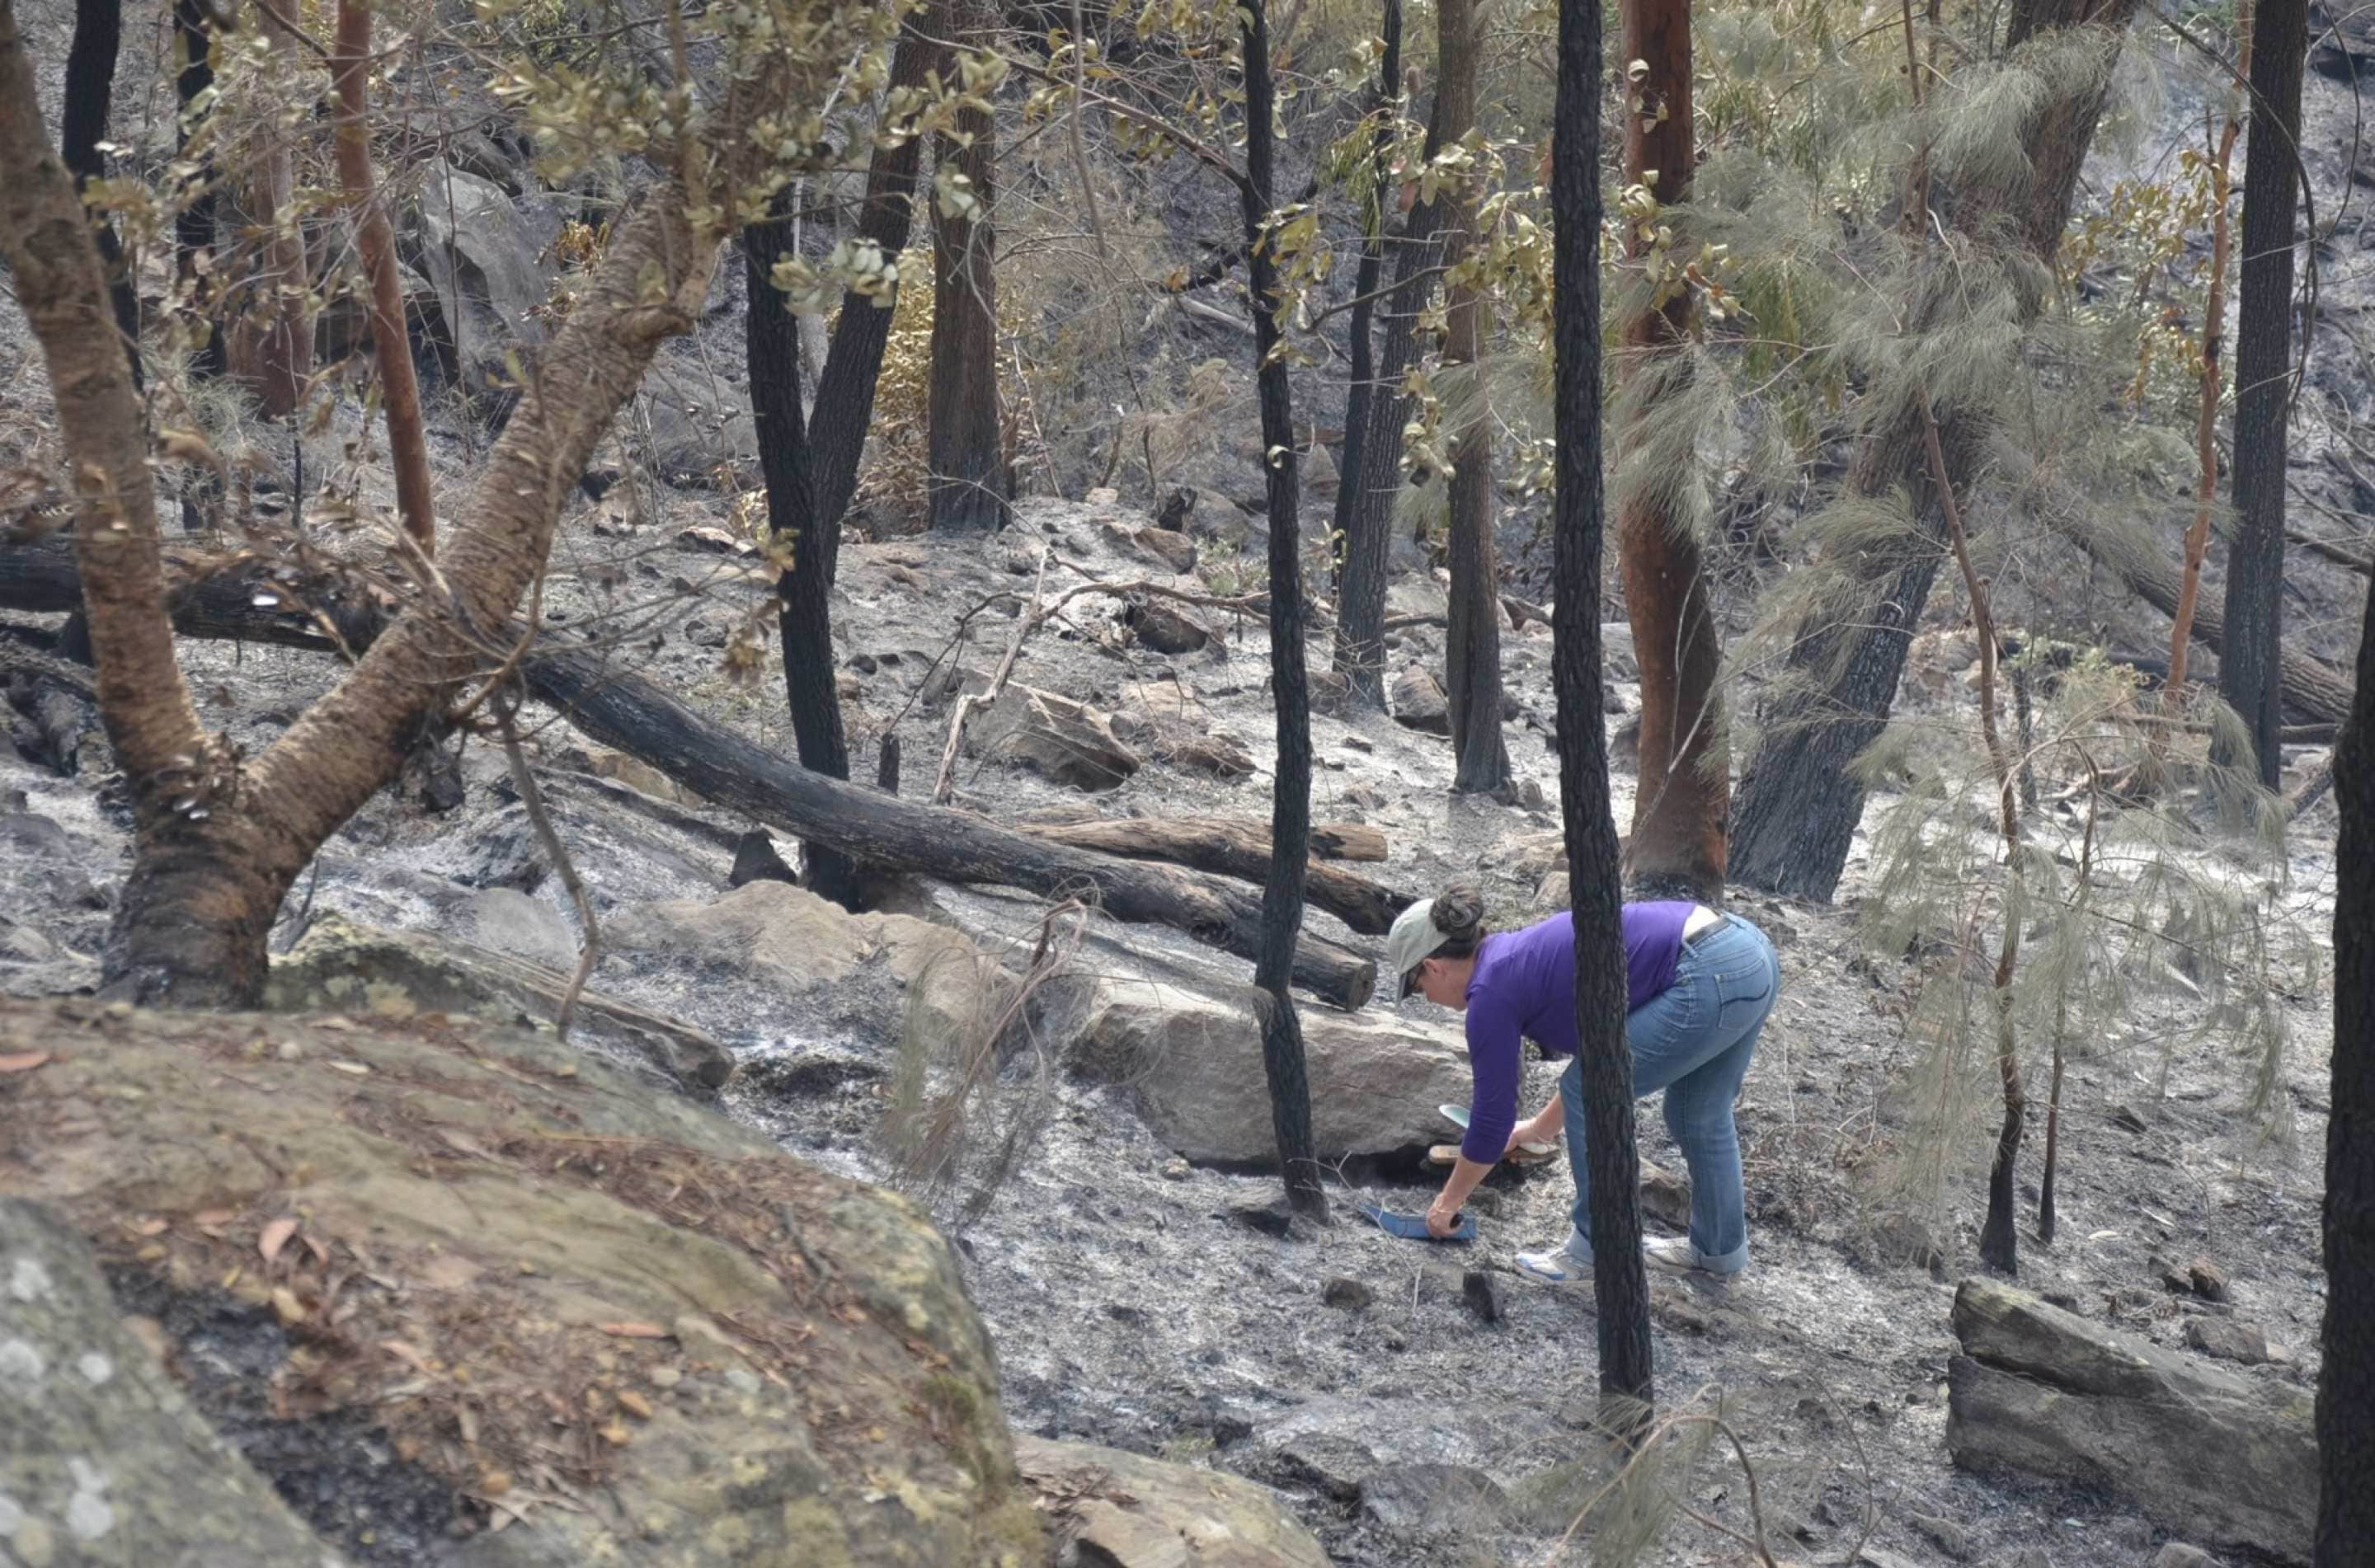 Associate Professor Tina Bell collecting ash from bushfire affected forest in Berowra Valley, north of Sydney.